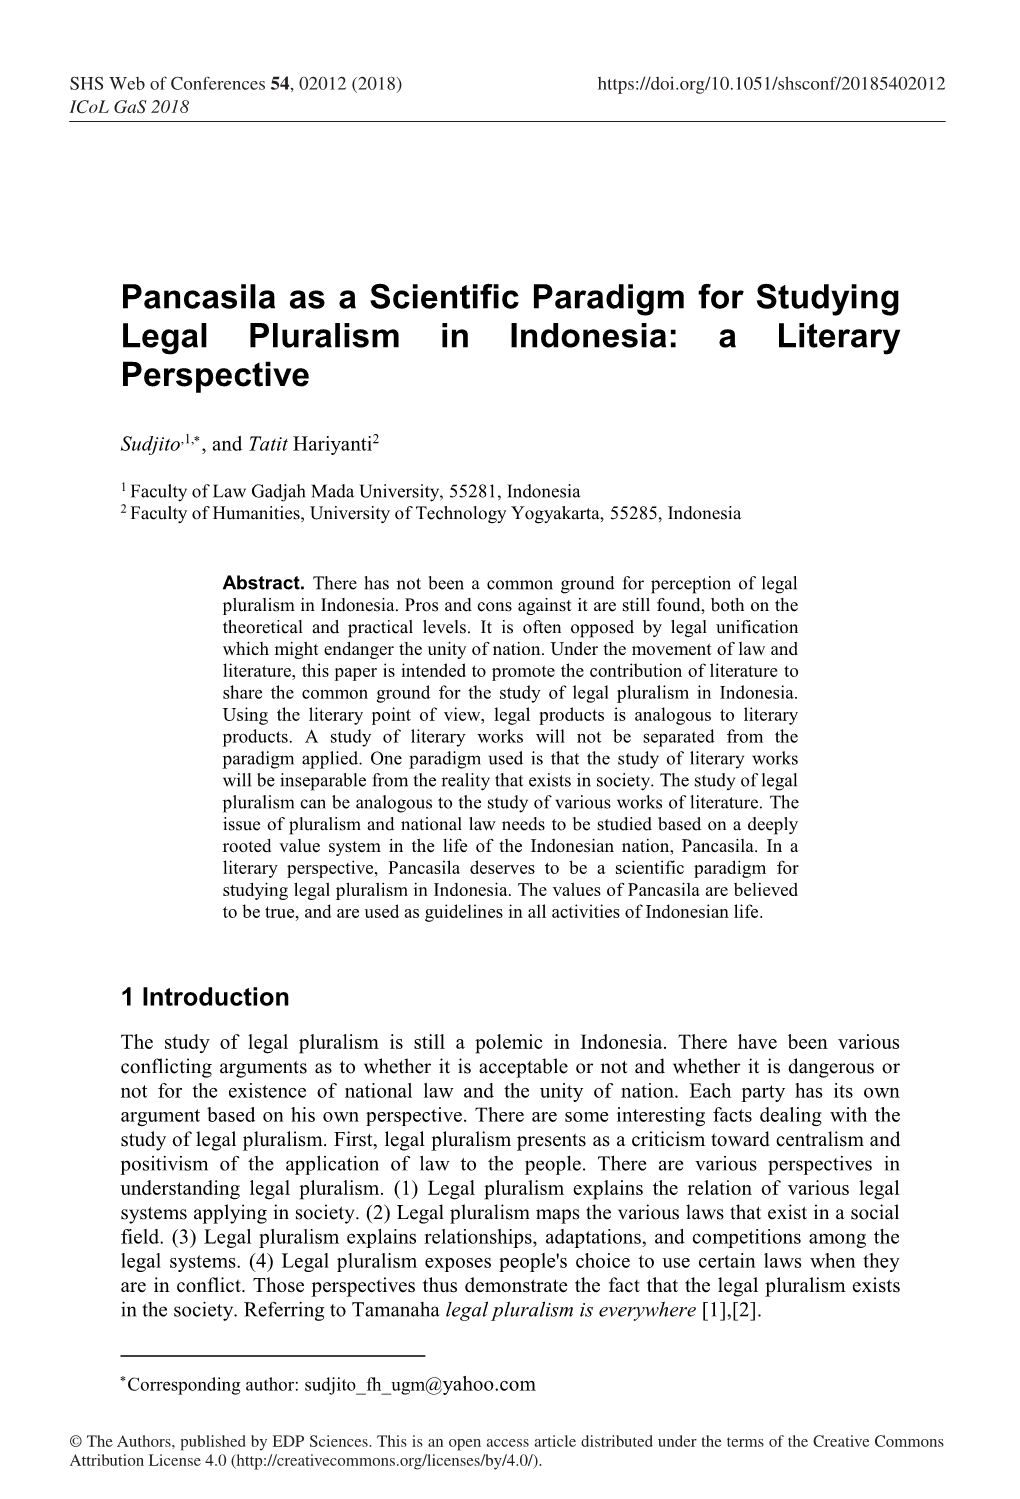 Pancasila As a Scientific Paradigm for Studying Legal Pluralism in Indonesia: a Literary Perspective